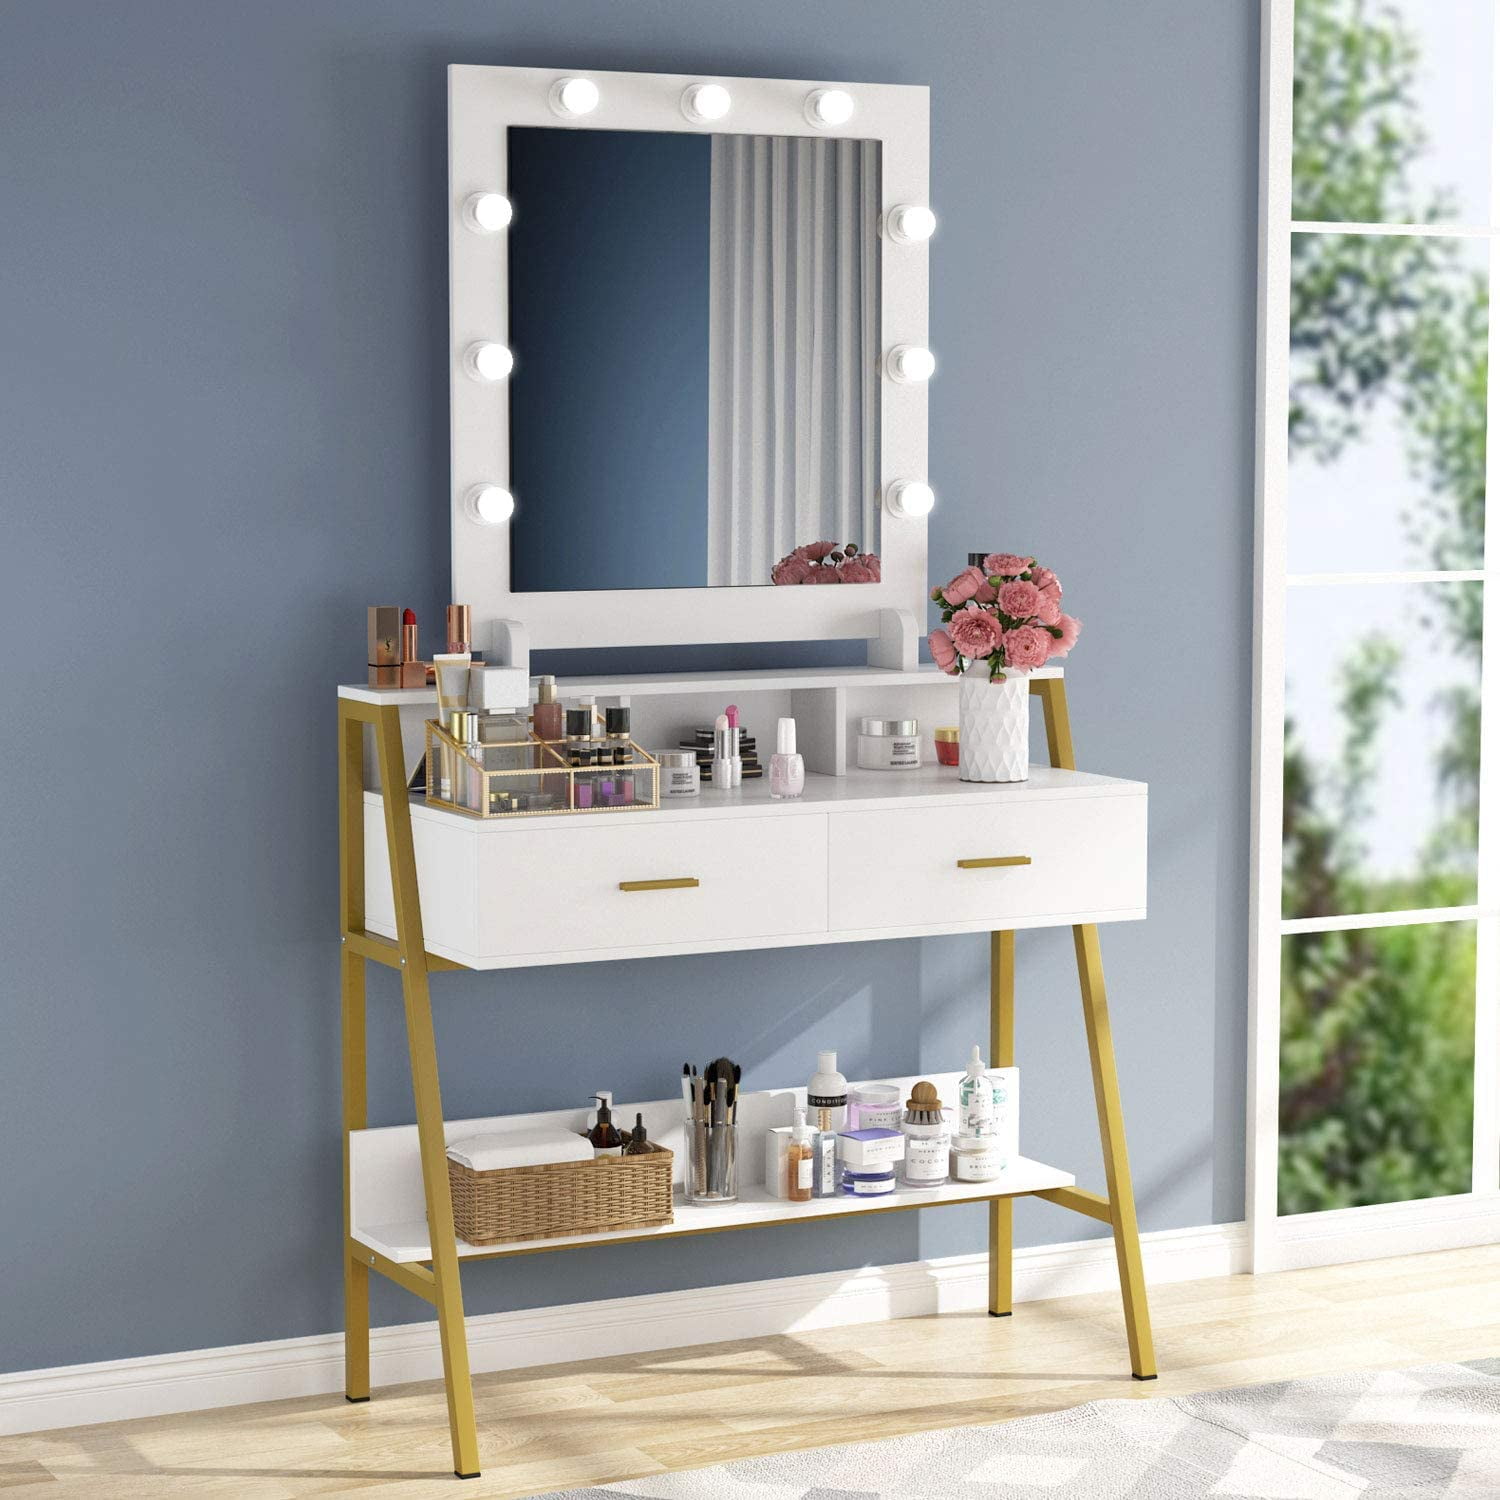 girls dressing table with lights